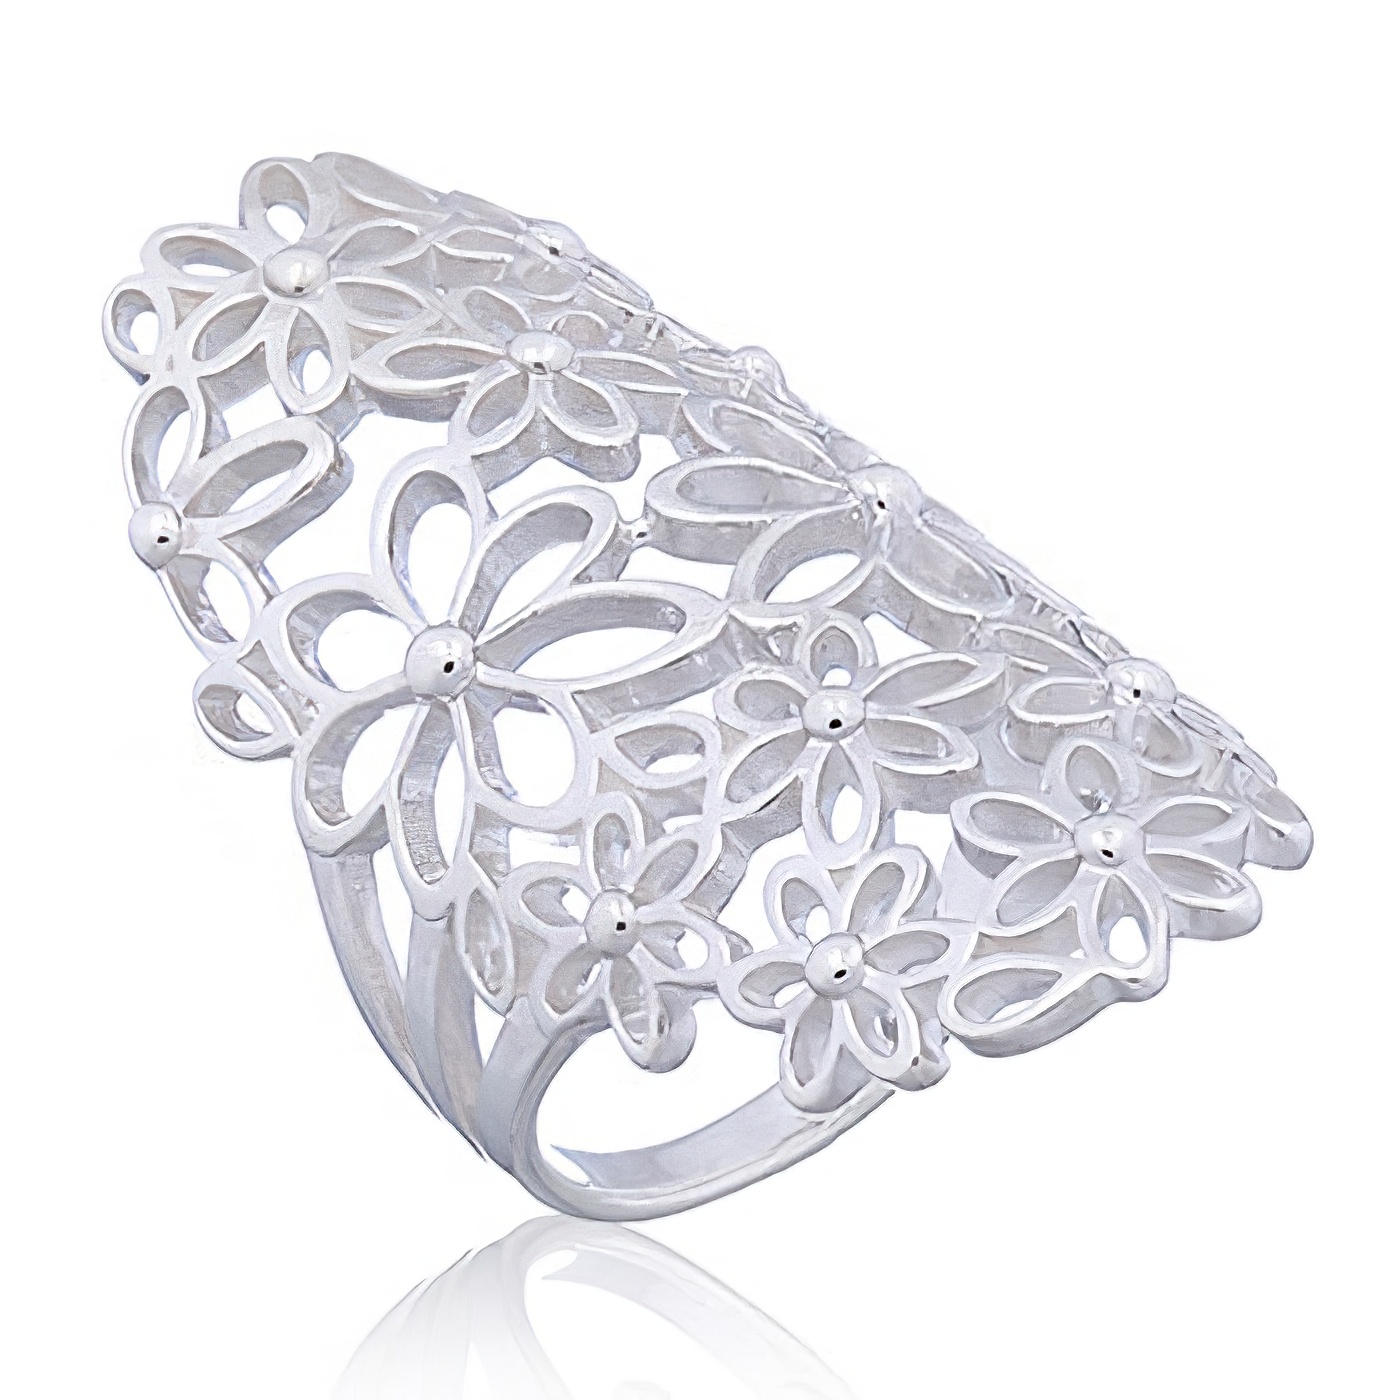 Daisy in Bloom Ajoure 925 Silver Ring by BeYindi 